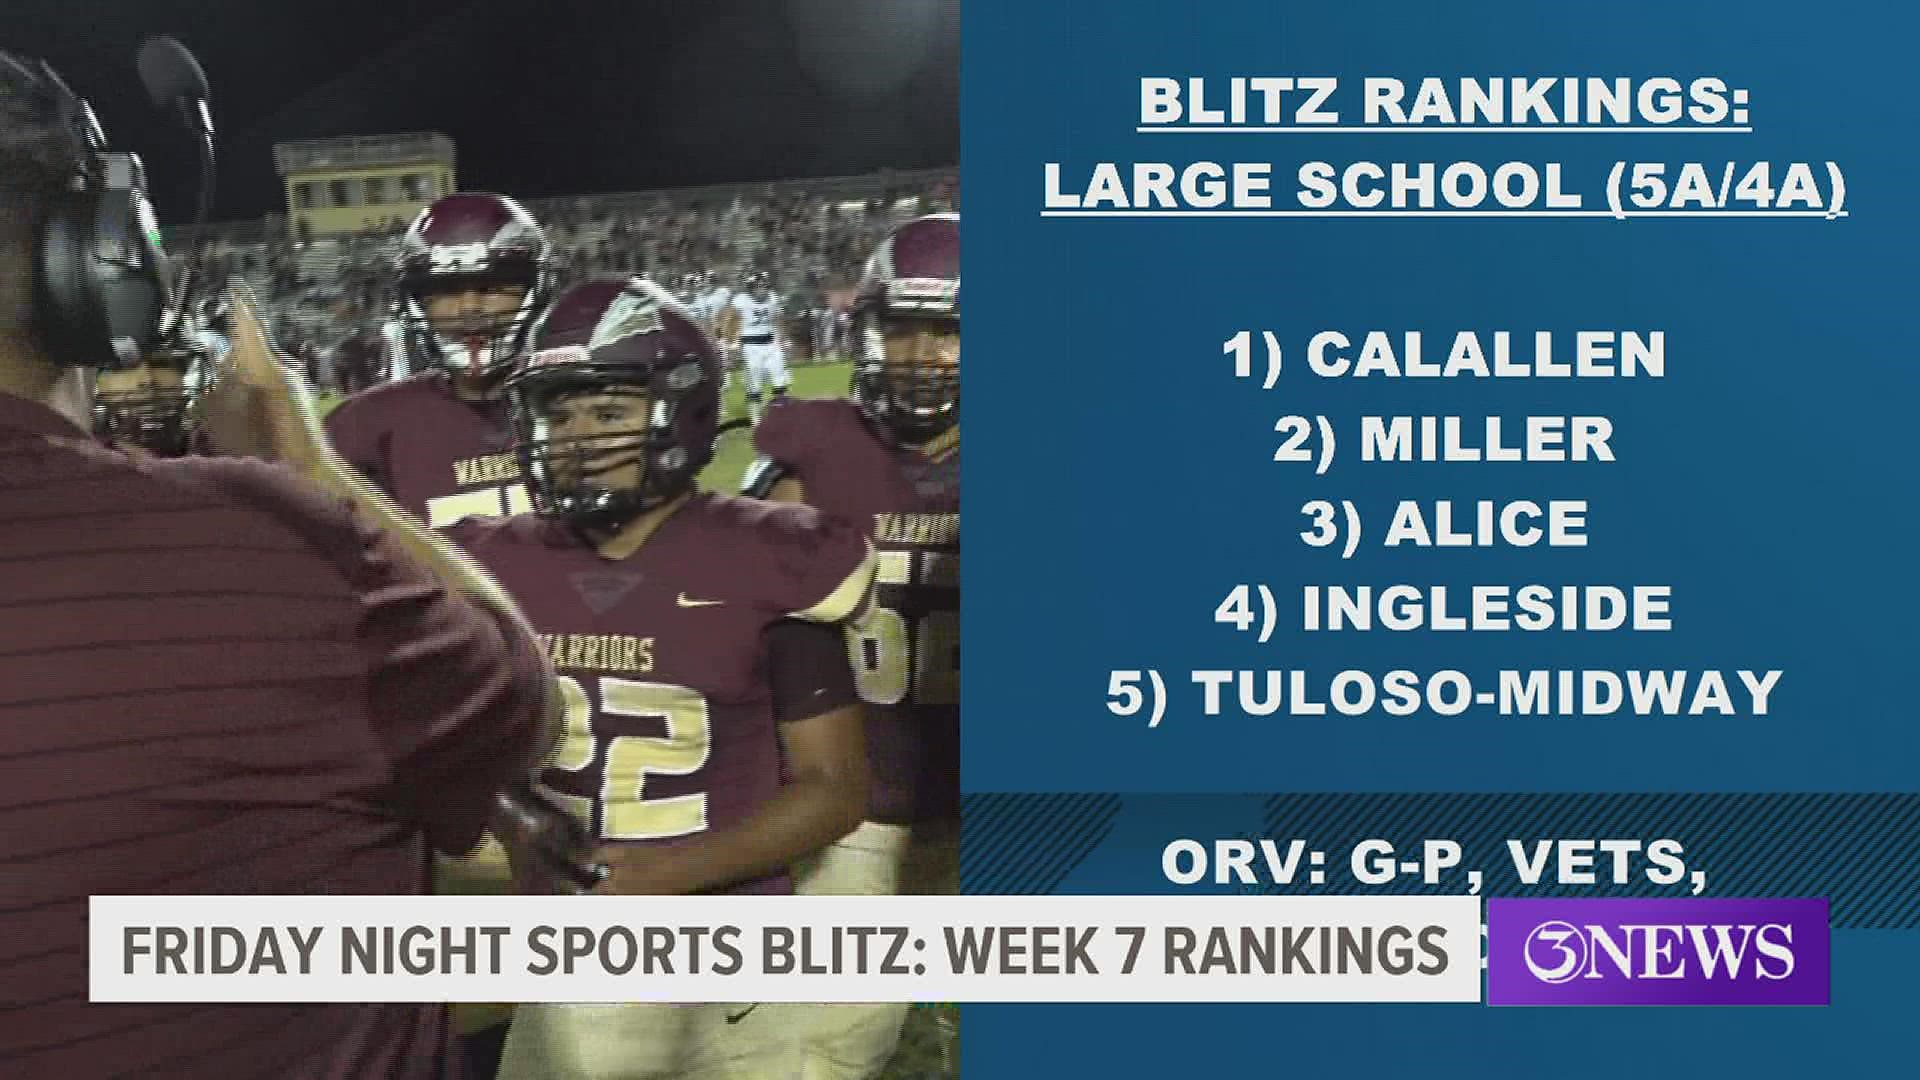 A couple of big games between teams in the Blitz rankings highlight the slate for Week 7.